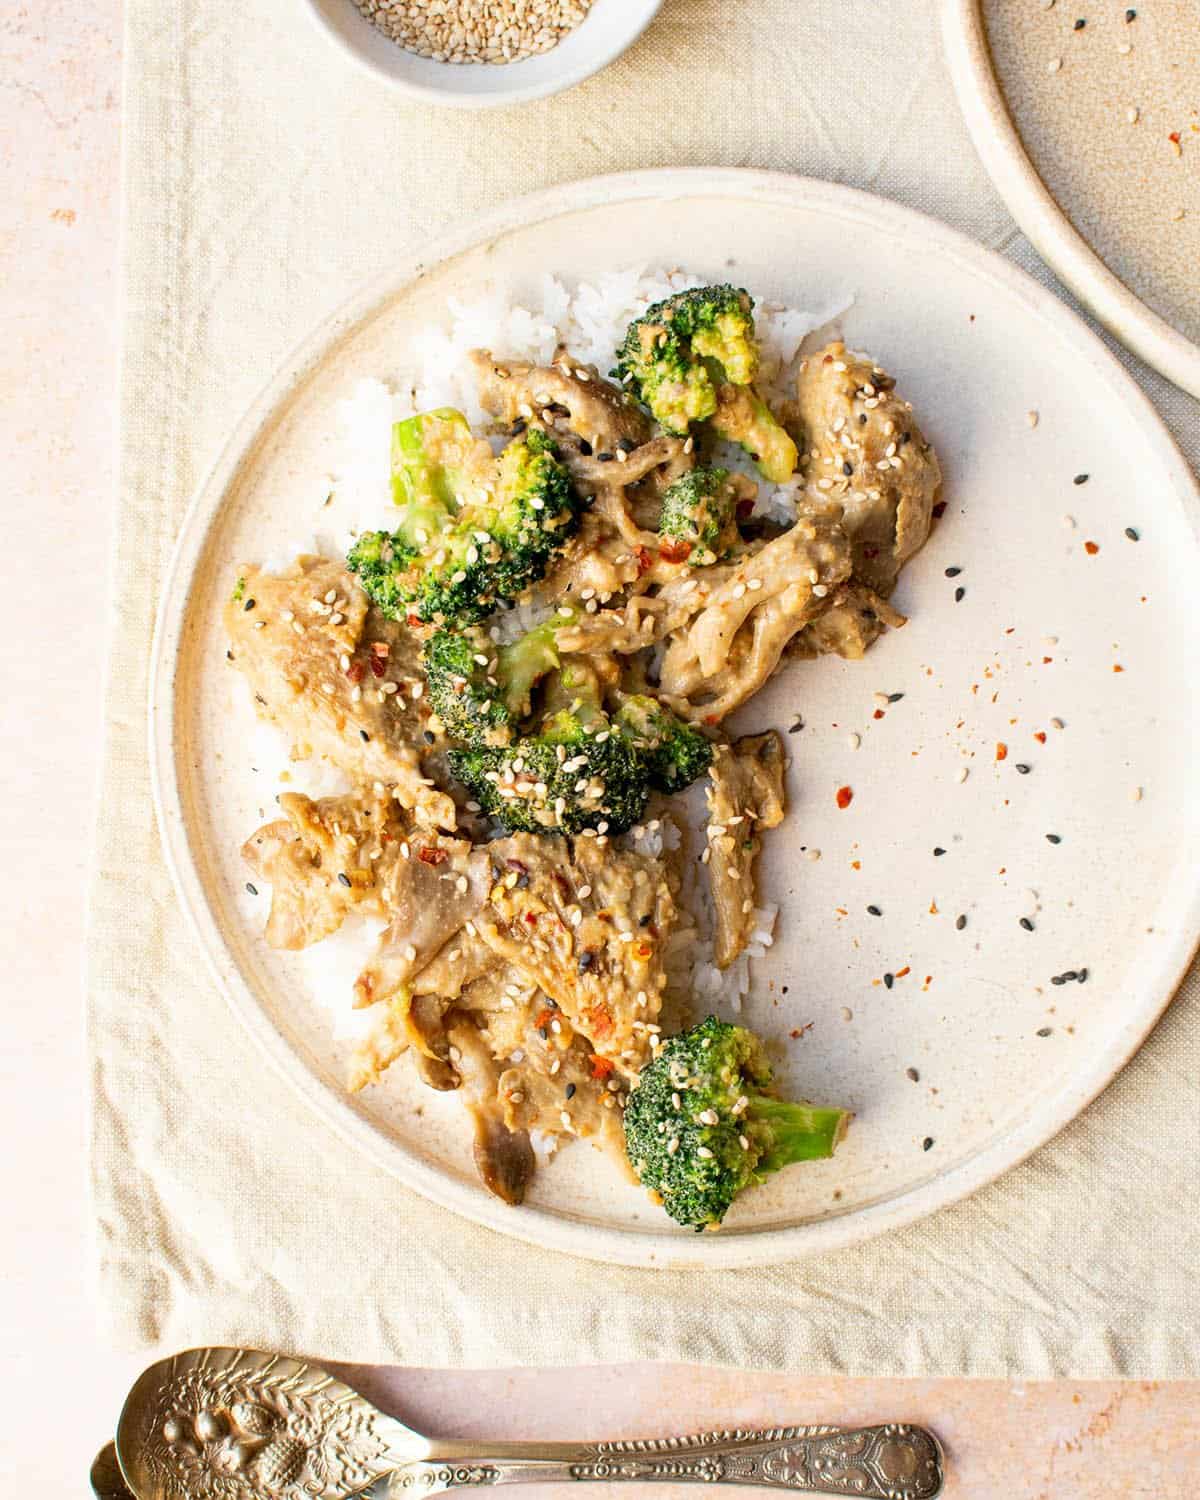 Oyster mushroom stir fry on a plate with spoons.